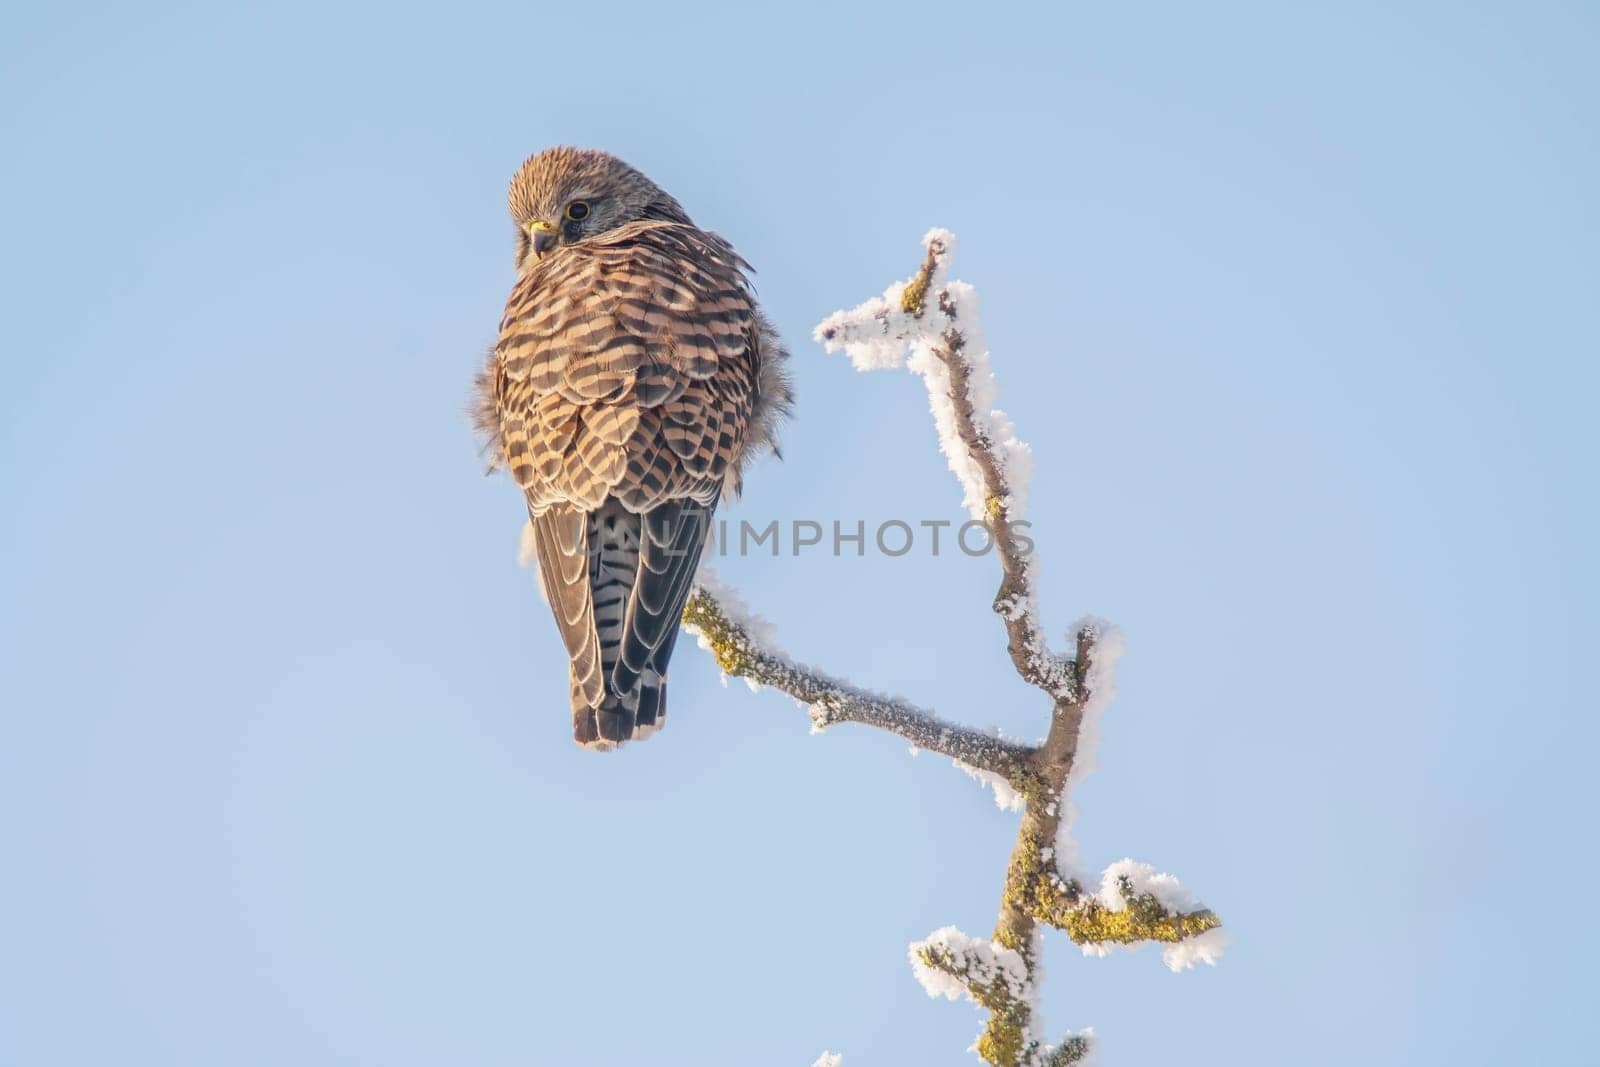 kestrel perches on a snowy branch on a tree in winter by mario_plechaty_photography